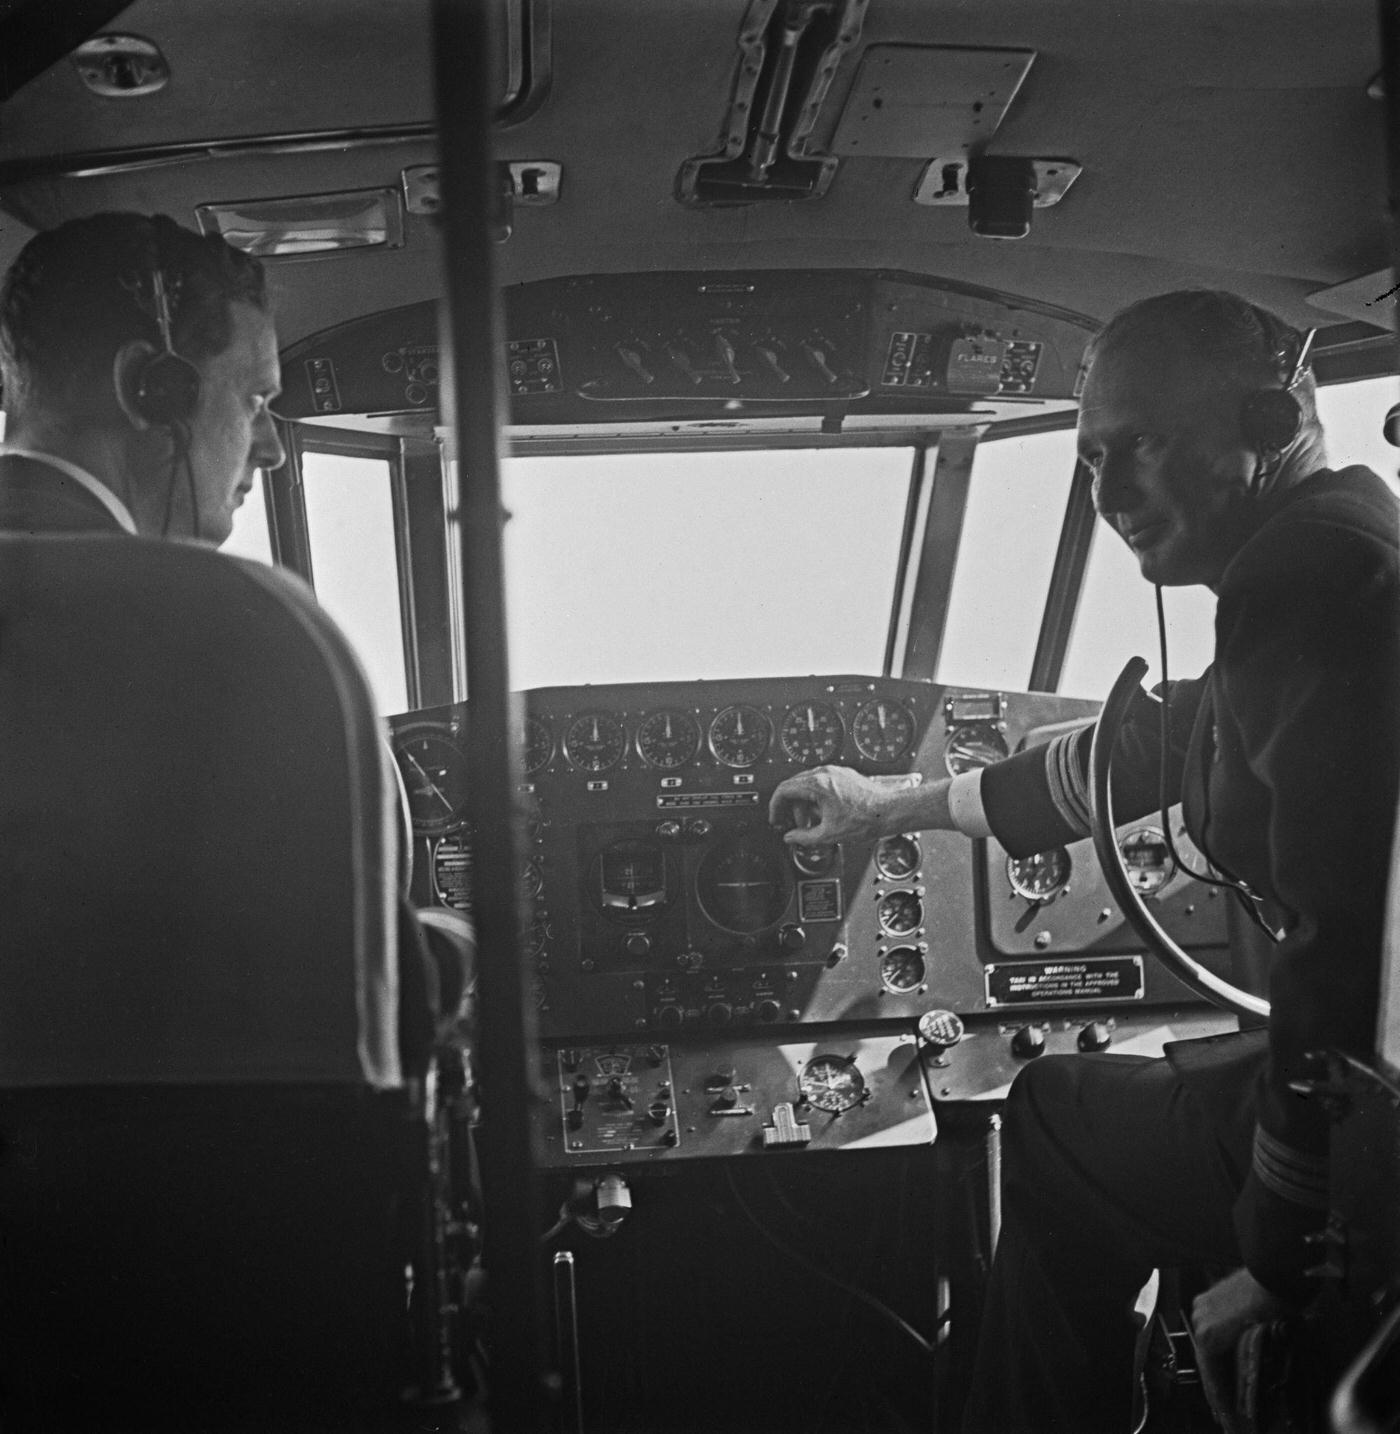 Captain D Peacock (on the left) and Captain Bill Craig are seated in the cockpit of the British Overseas Airways Corporation (BOAC) Boeing 314A Clipper flying boat Berwick (registration G-AGCA) prior to flying the aircraft on an international flight from England in 1942.